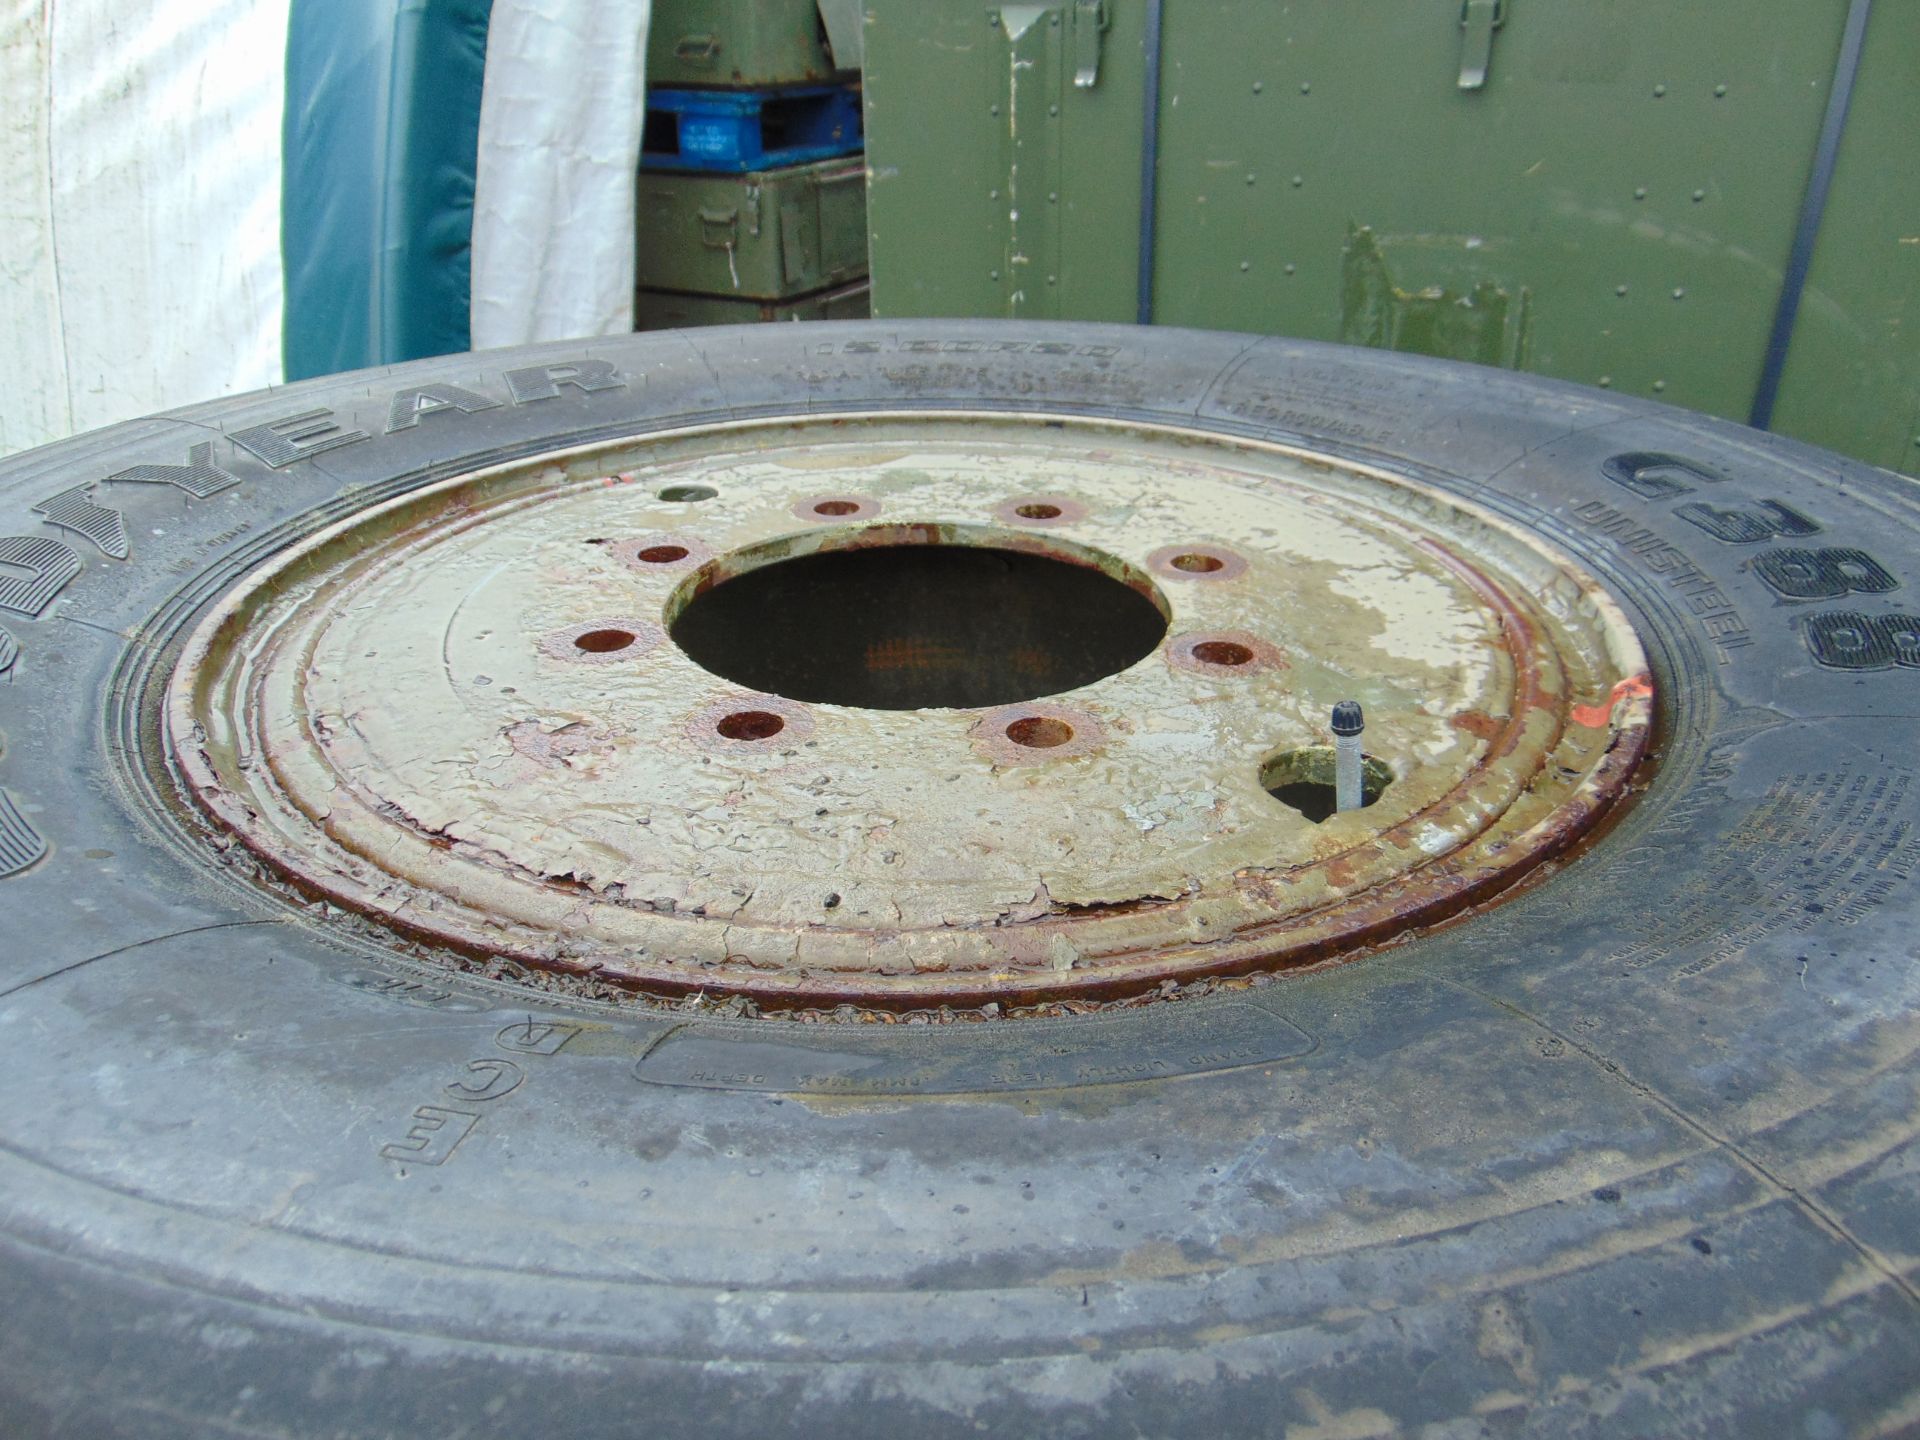 Qty 4 x Goodyear 12.00R20 G388 Unisteel tyres, unused still with bobbles fitted on 8 stud rims - Image 6 of 9